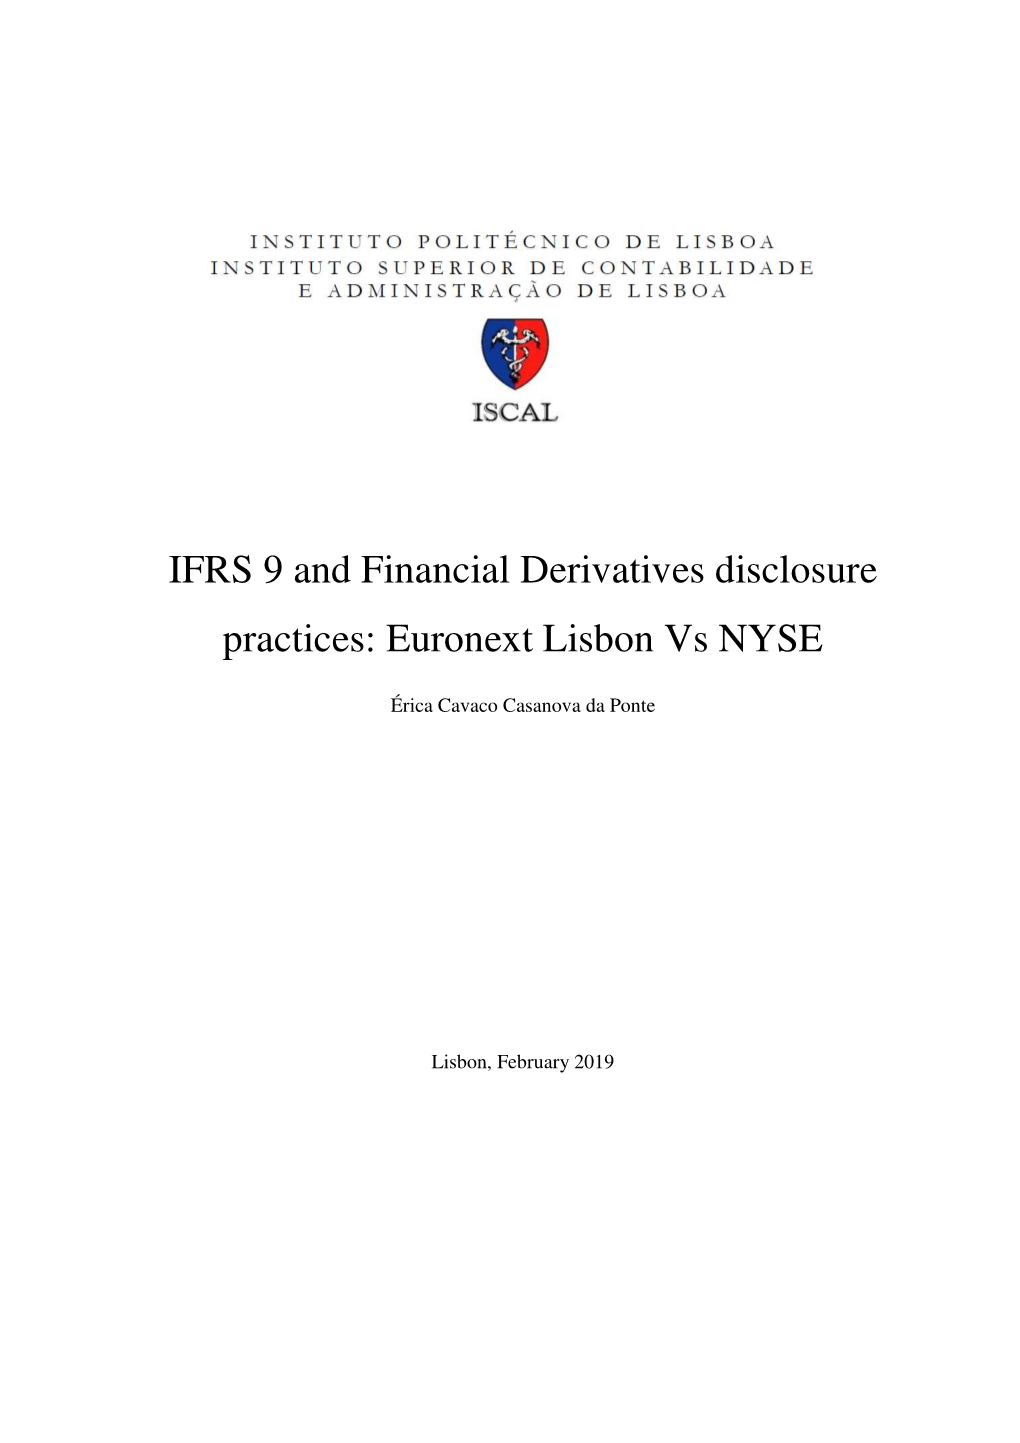 IFRS 9 the Step Forward of IAS 39